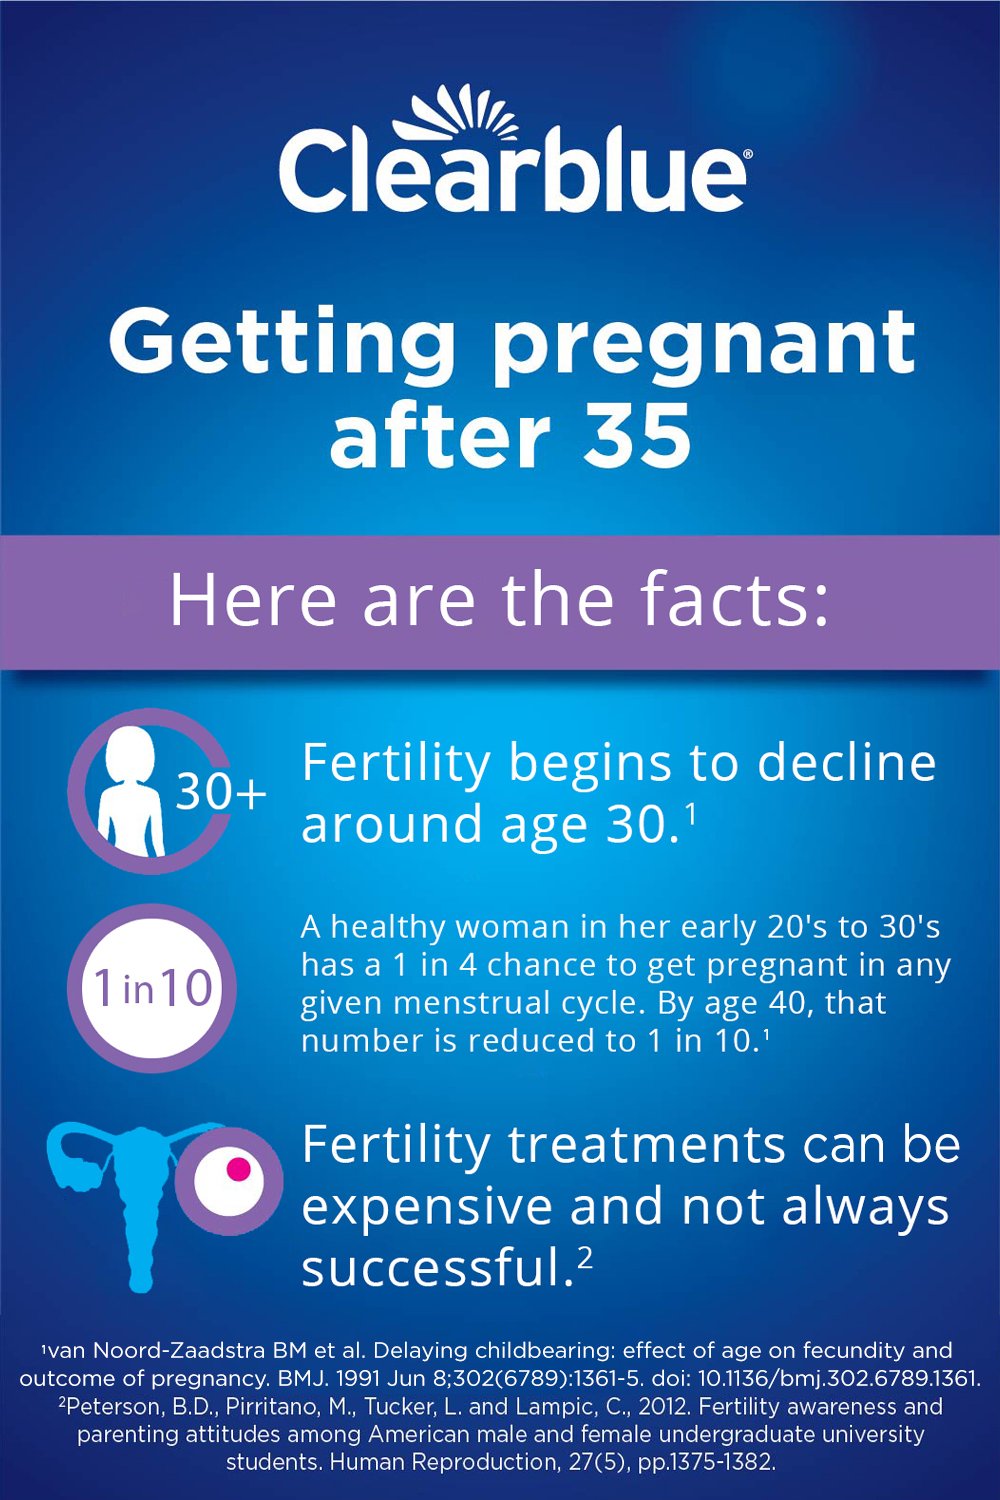 Facts about getting pregnant after 35